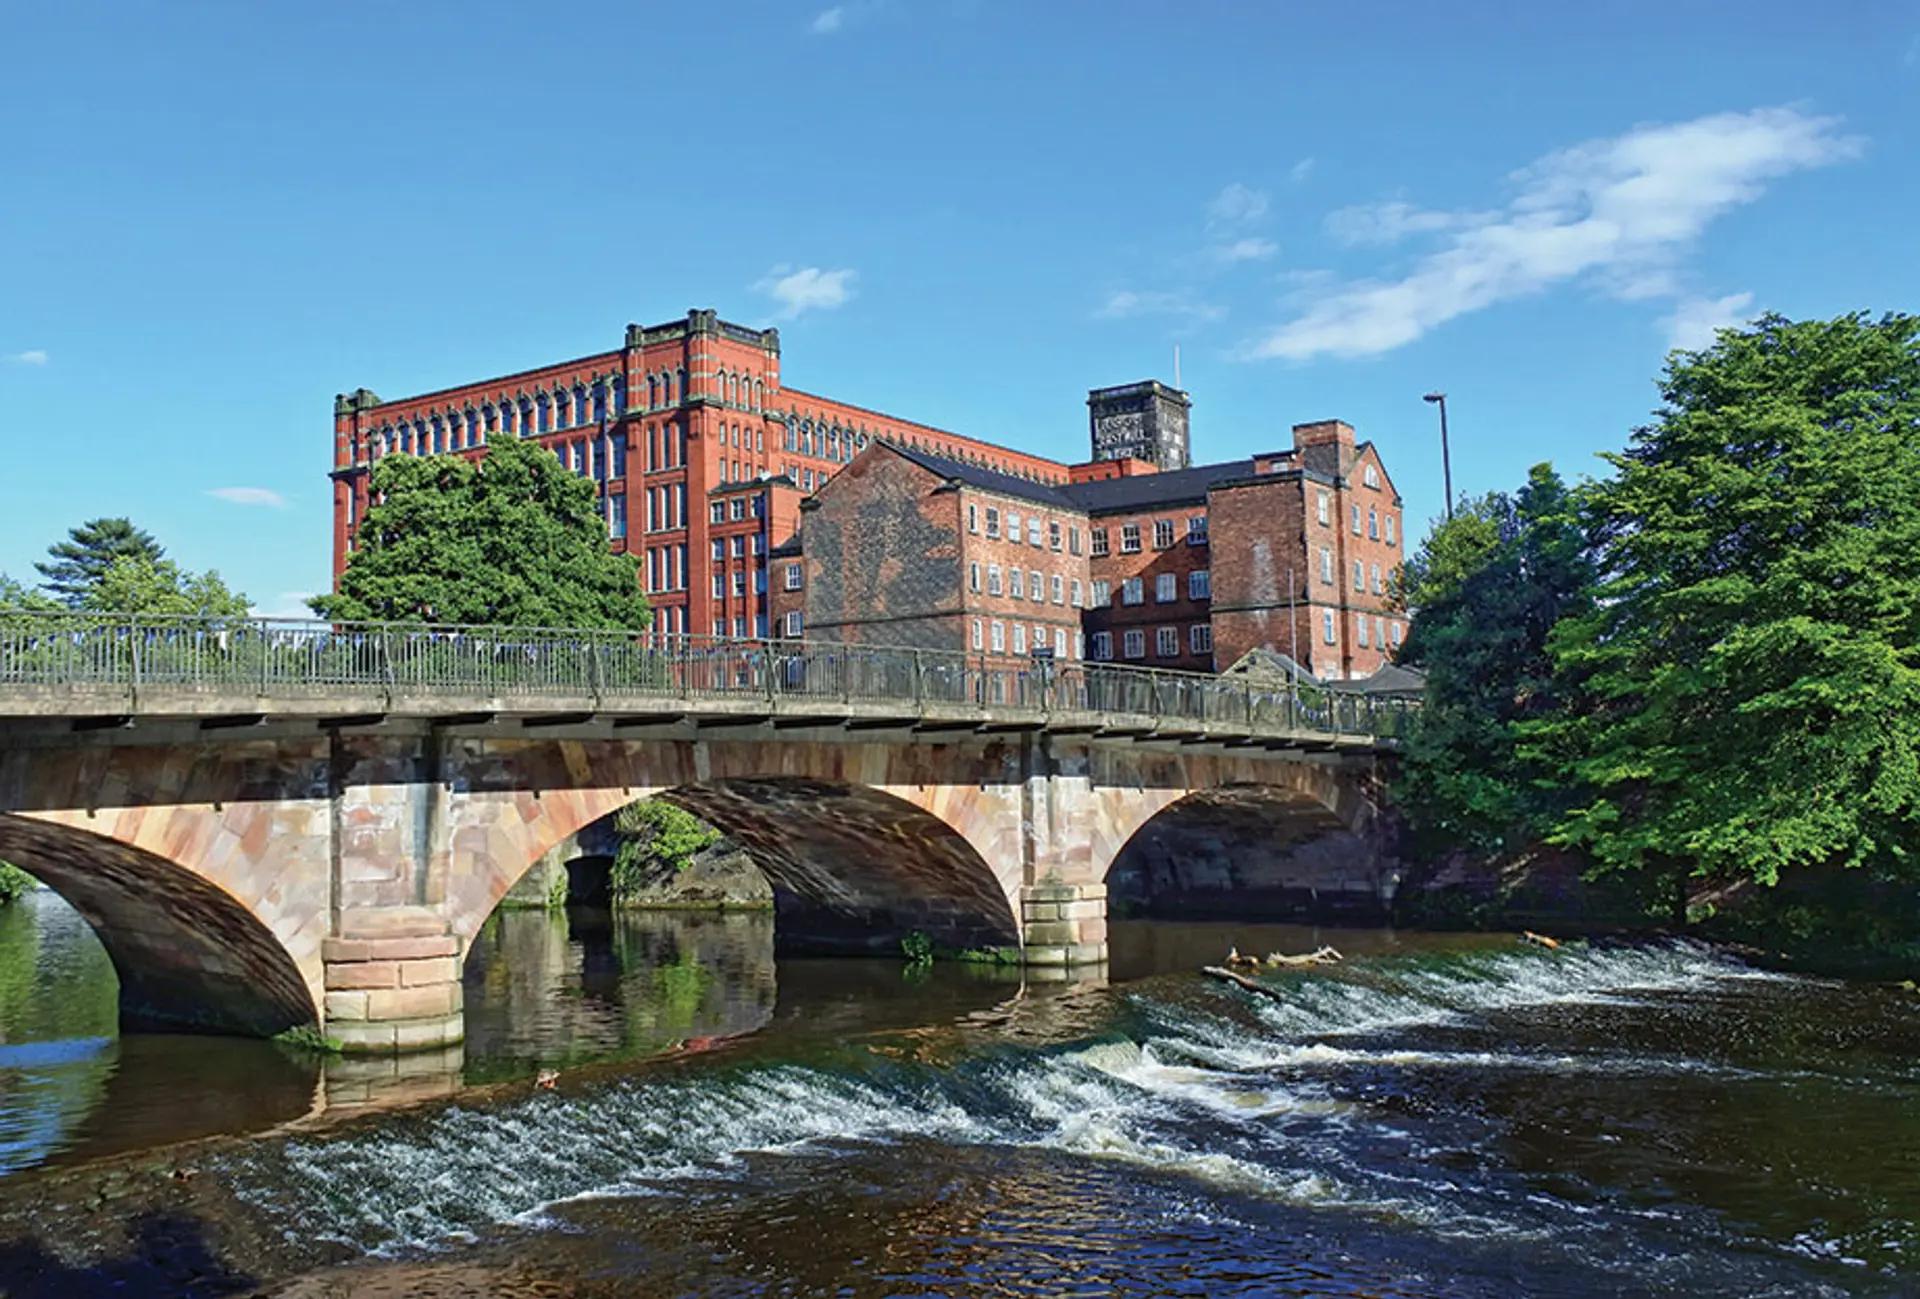 Strutt’s North Mill Museum, in a former cotton mill in Belper, Derbyshire, closed in September 2022, one of the many British museums and heritage sites existentially threatened by the economic crisis © It’s No Game; Belper North Mill and the Derwent, Belper, Derbyshire